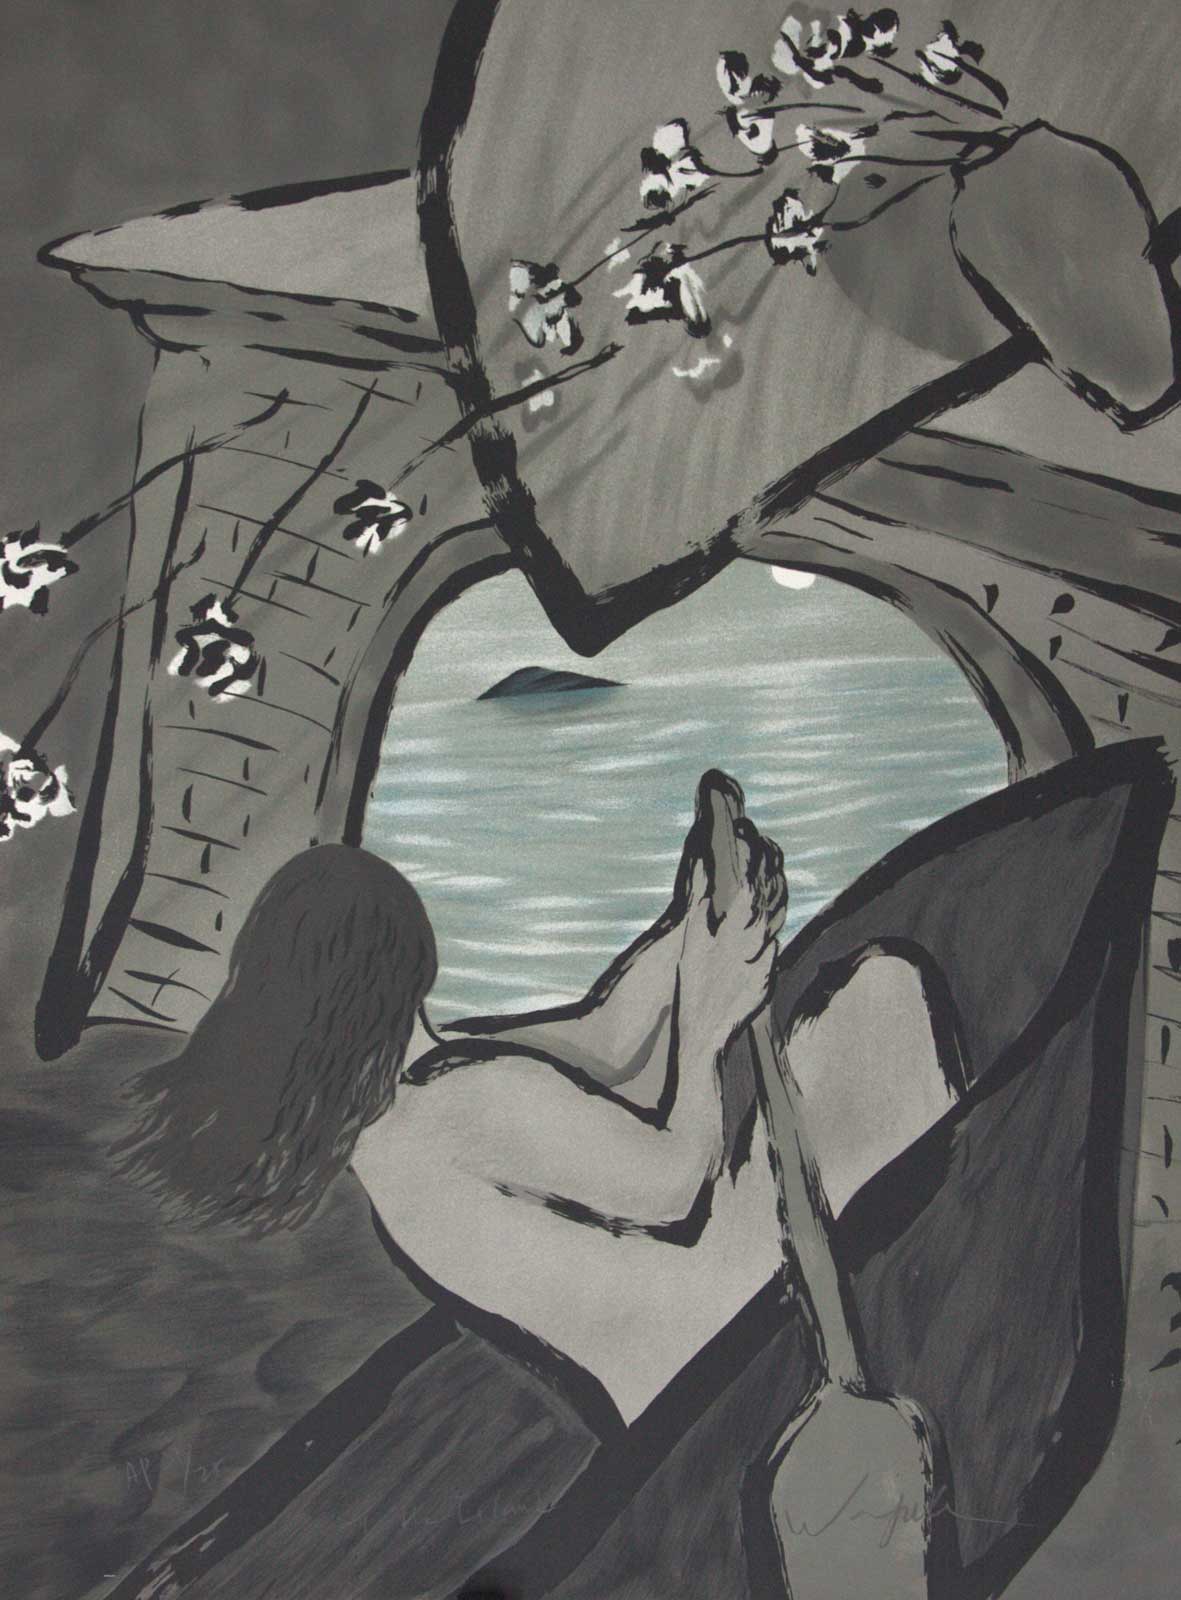 <em>To the Island</em>, 2001. Lithography, 32 x 22 in. (82 x 56 cm)